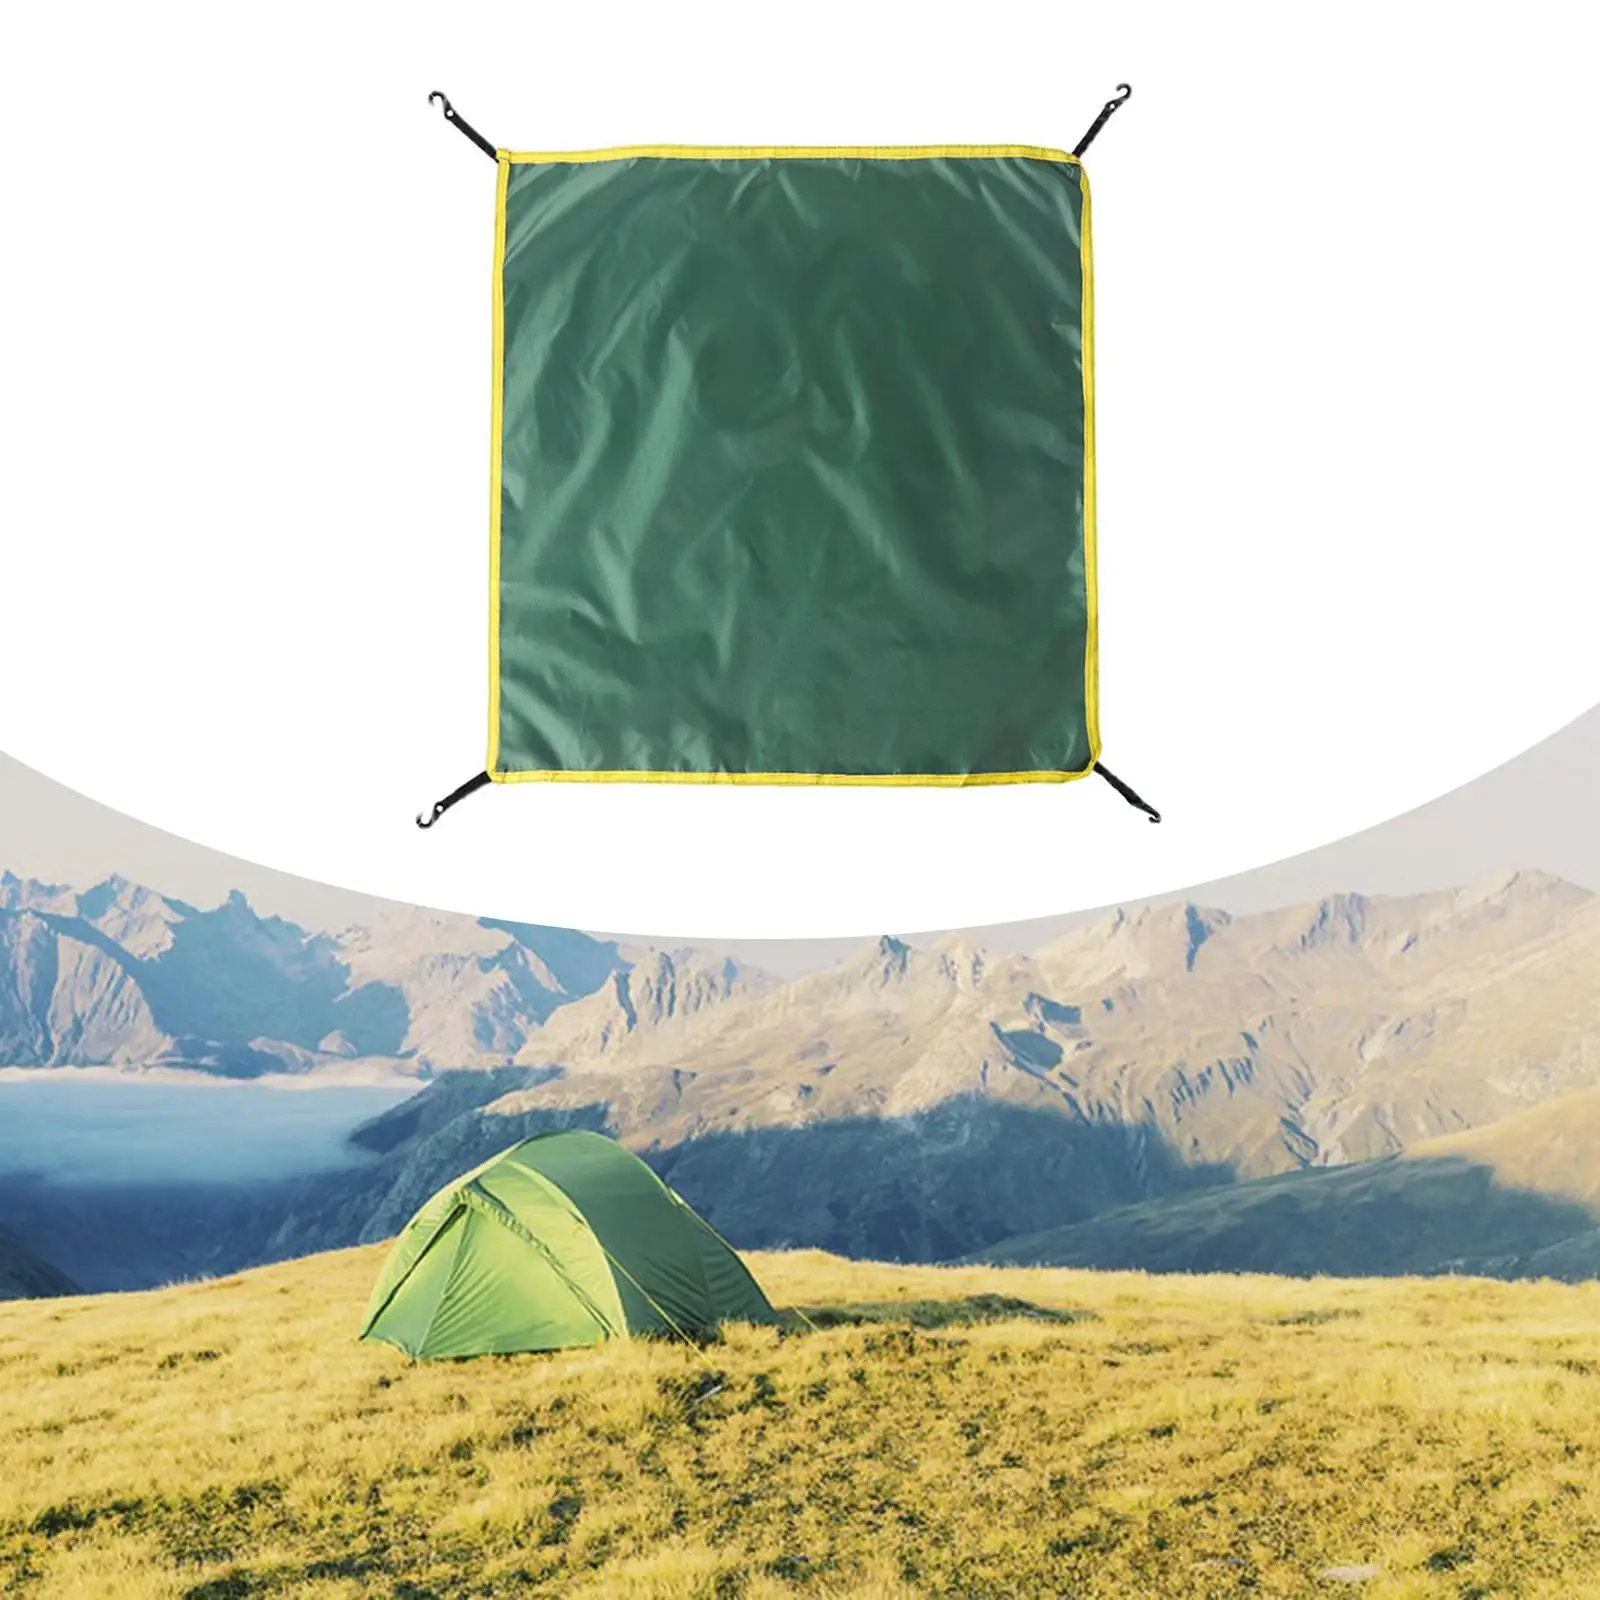 Rainfly Tent Tarp Fits 3-4 Person Automatic Tent, Rainproof Tent Top Cover